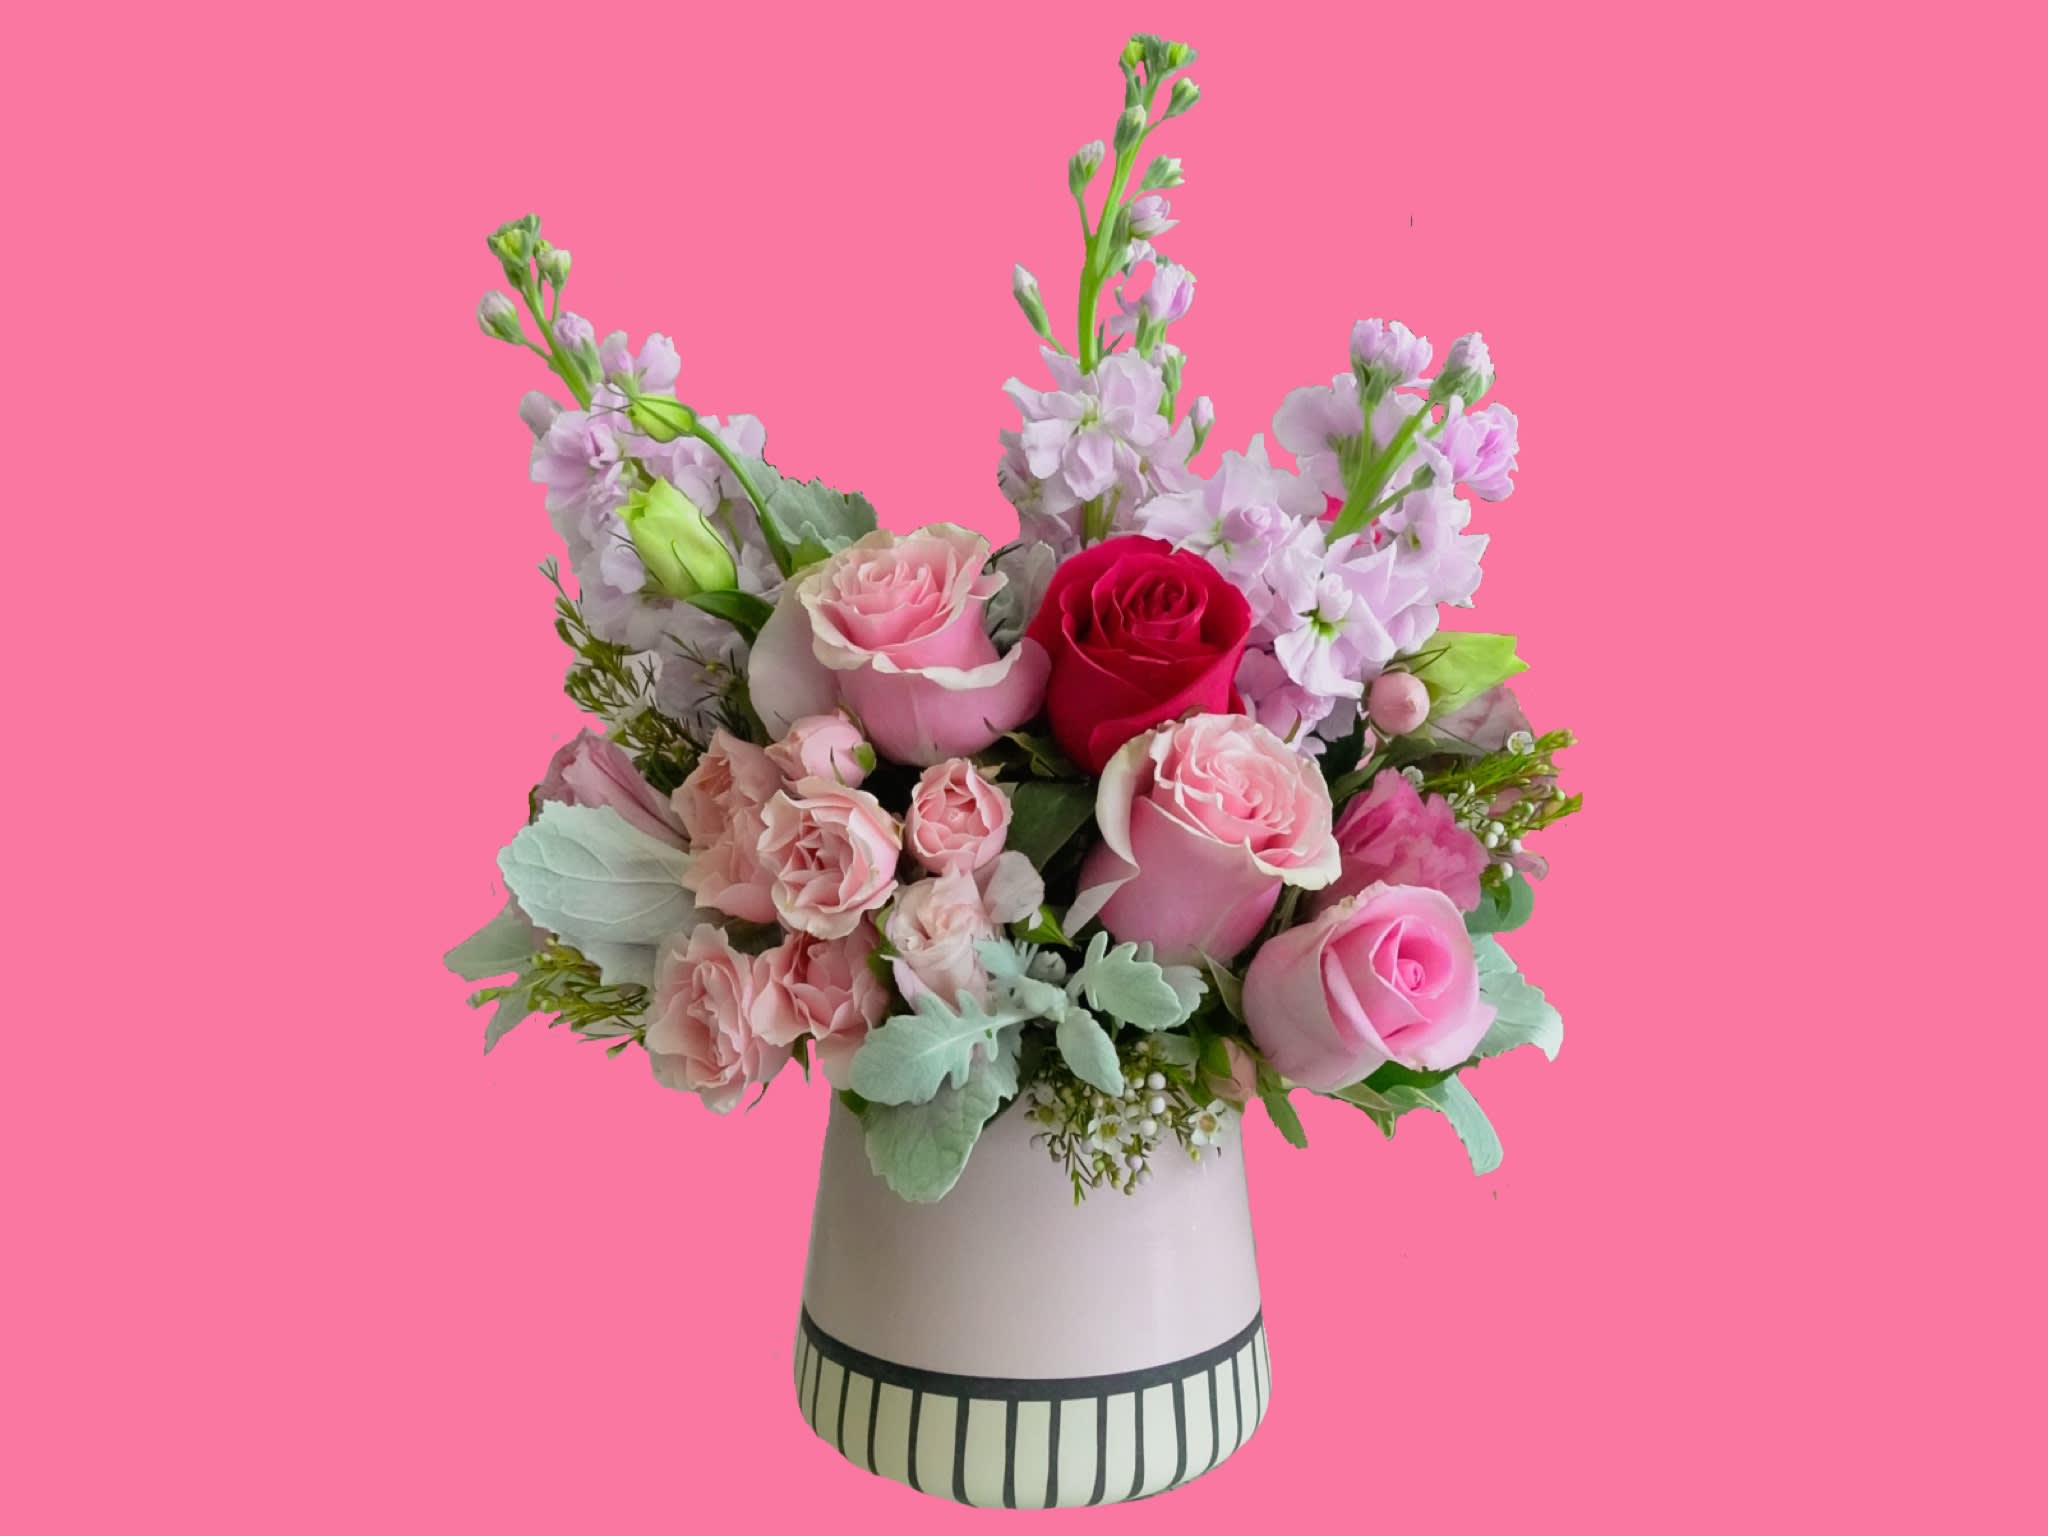 Precious Pink  - This impressive bouquet includes pink roses, hot pink roses, pink spray roses, white lisianthus , stock , dusty miller , wax with assorted greenery. Delivered in a pink vase. Orientation: All-Around